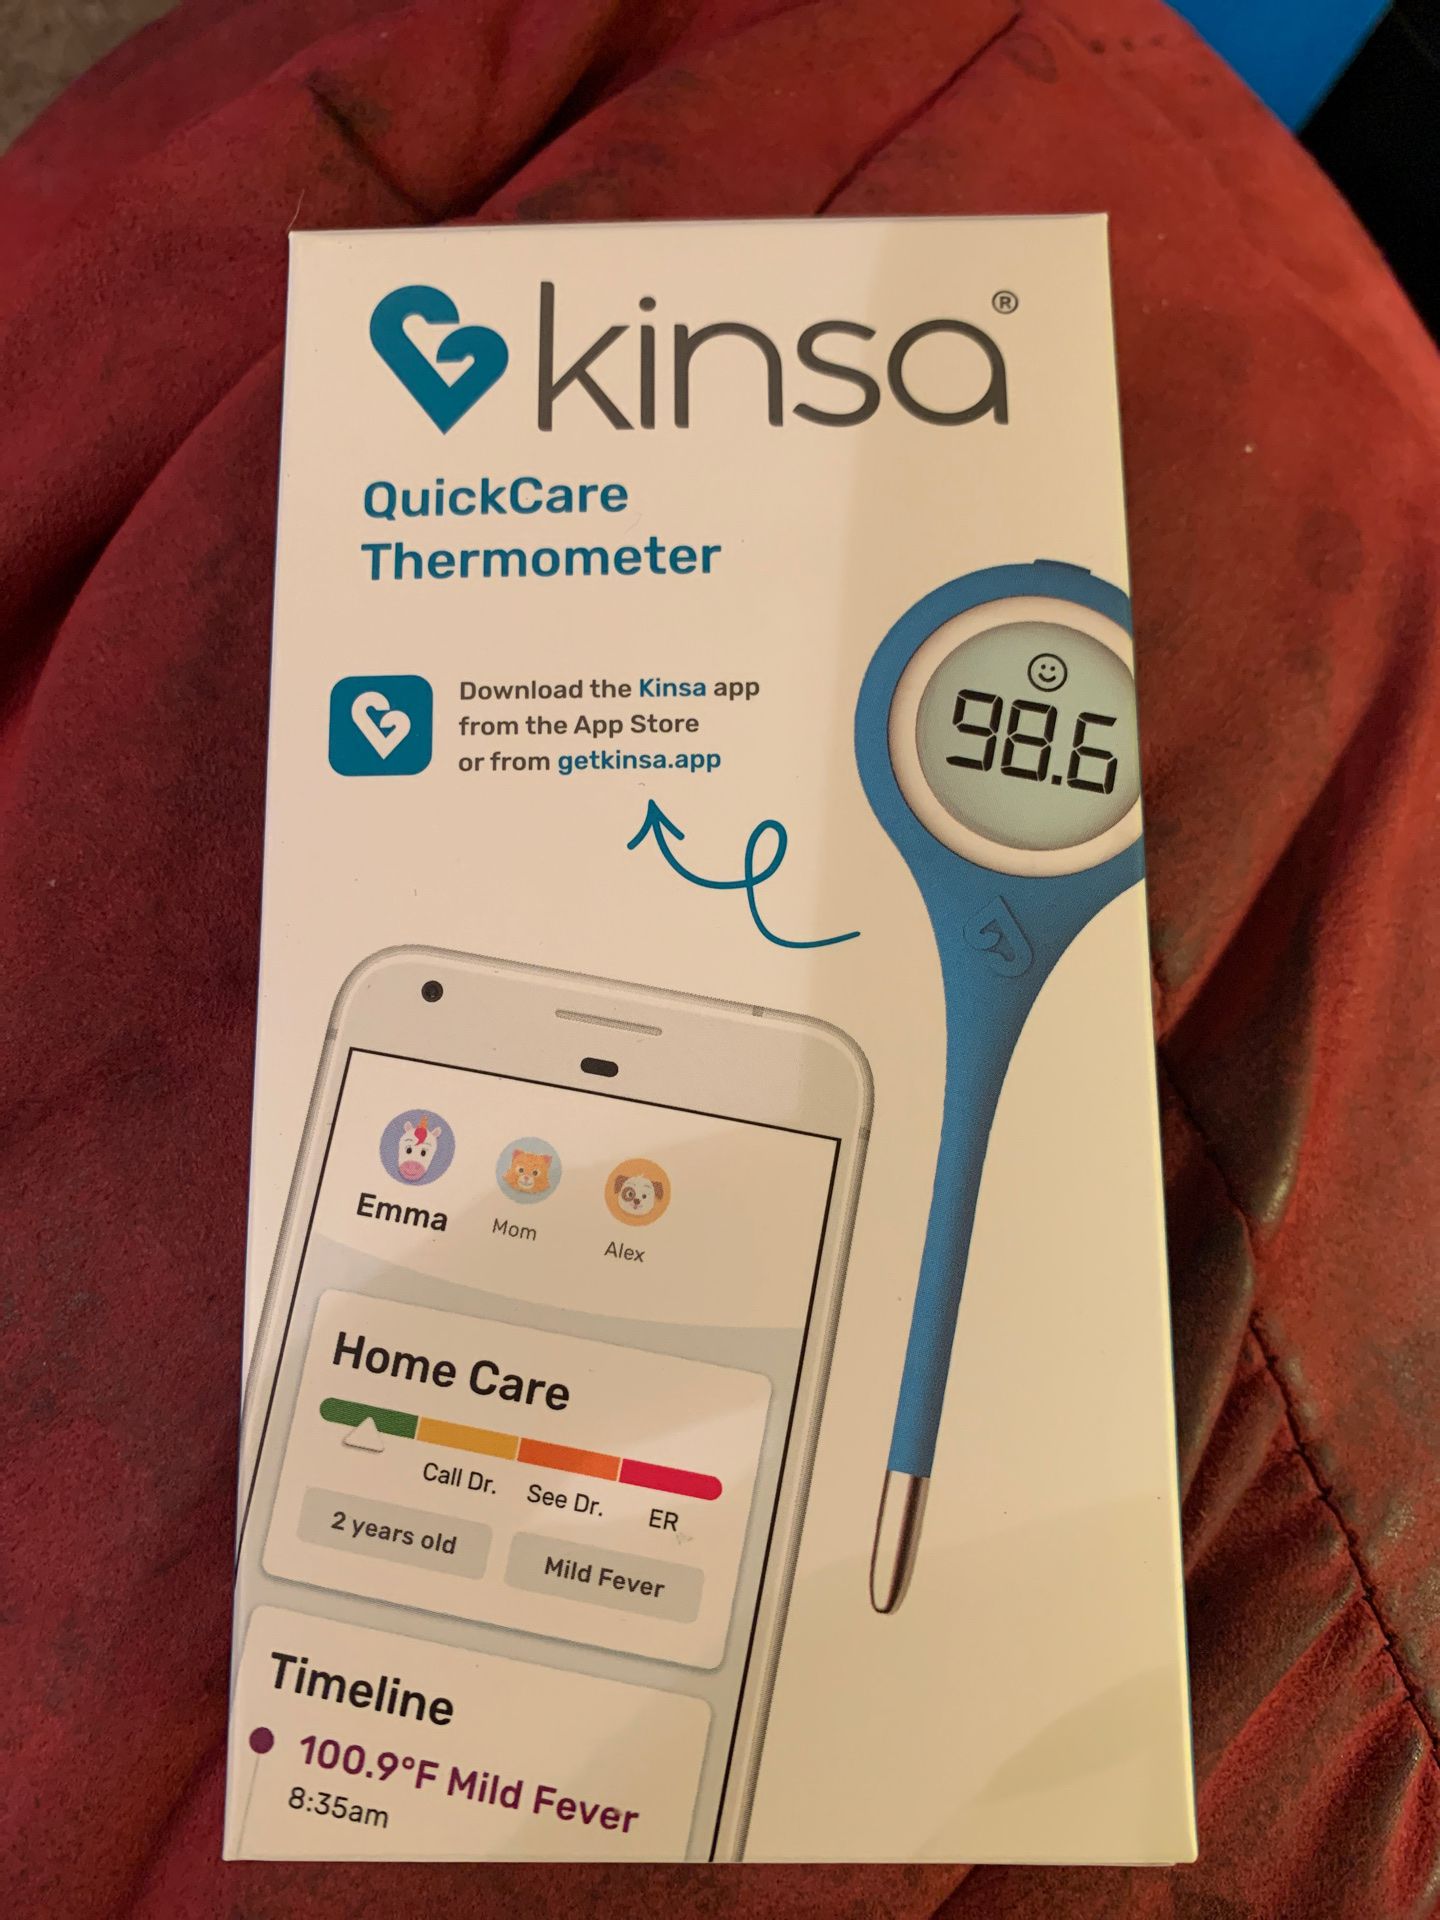 Kinsa digitalTermometer . Comes with instructions to use the Kinsa app.